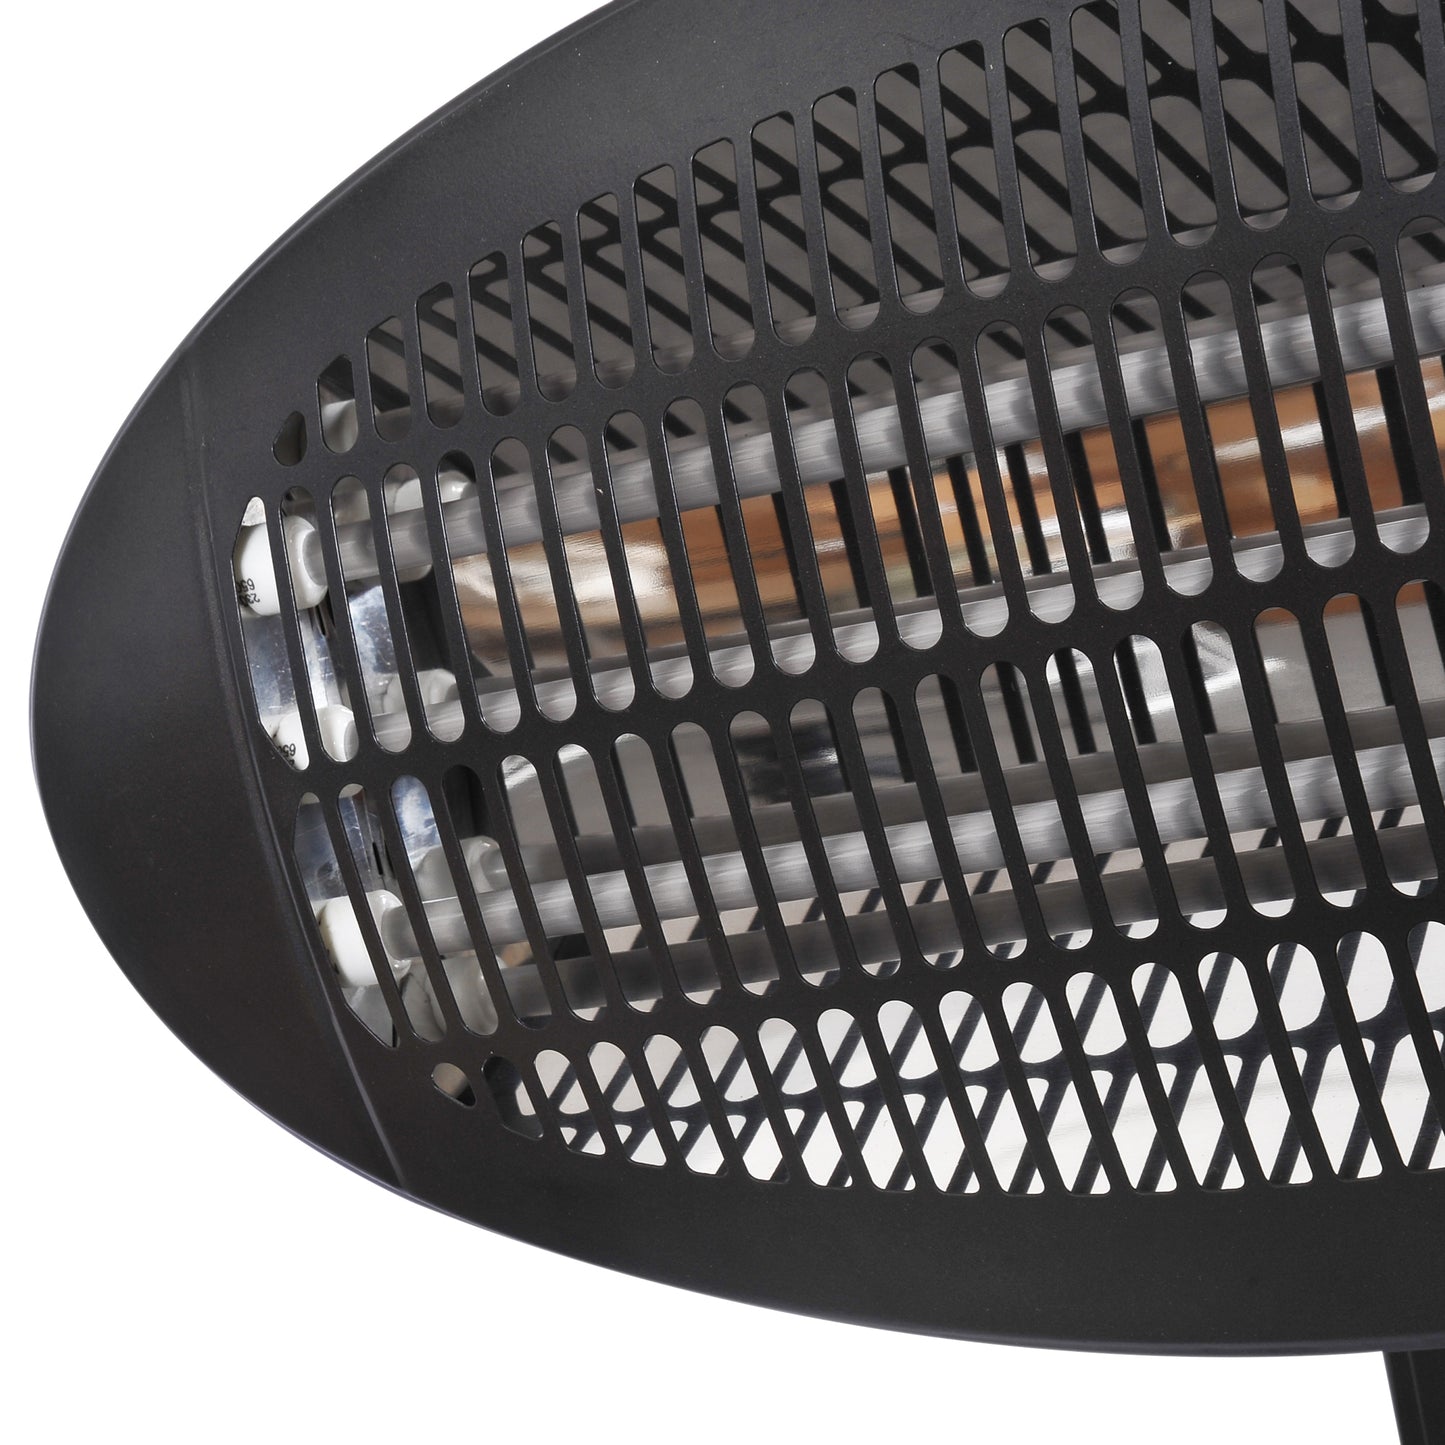 Outsunny Wall Mount Electric Infrared Patio Heater, 220V-240V-Black